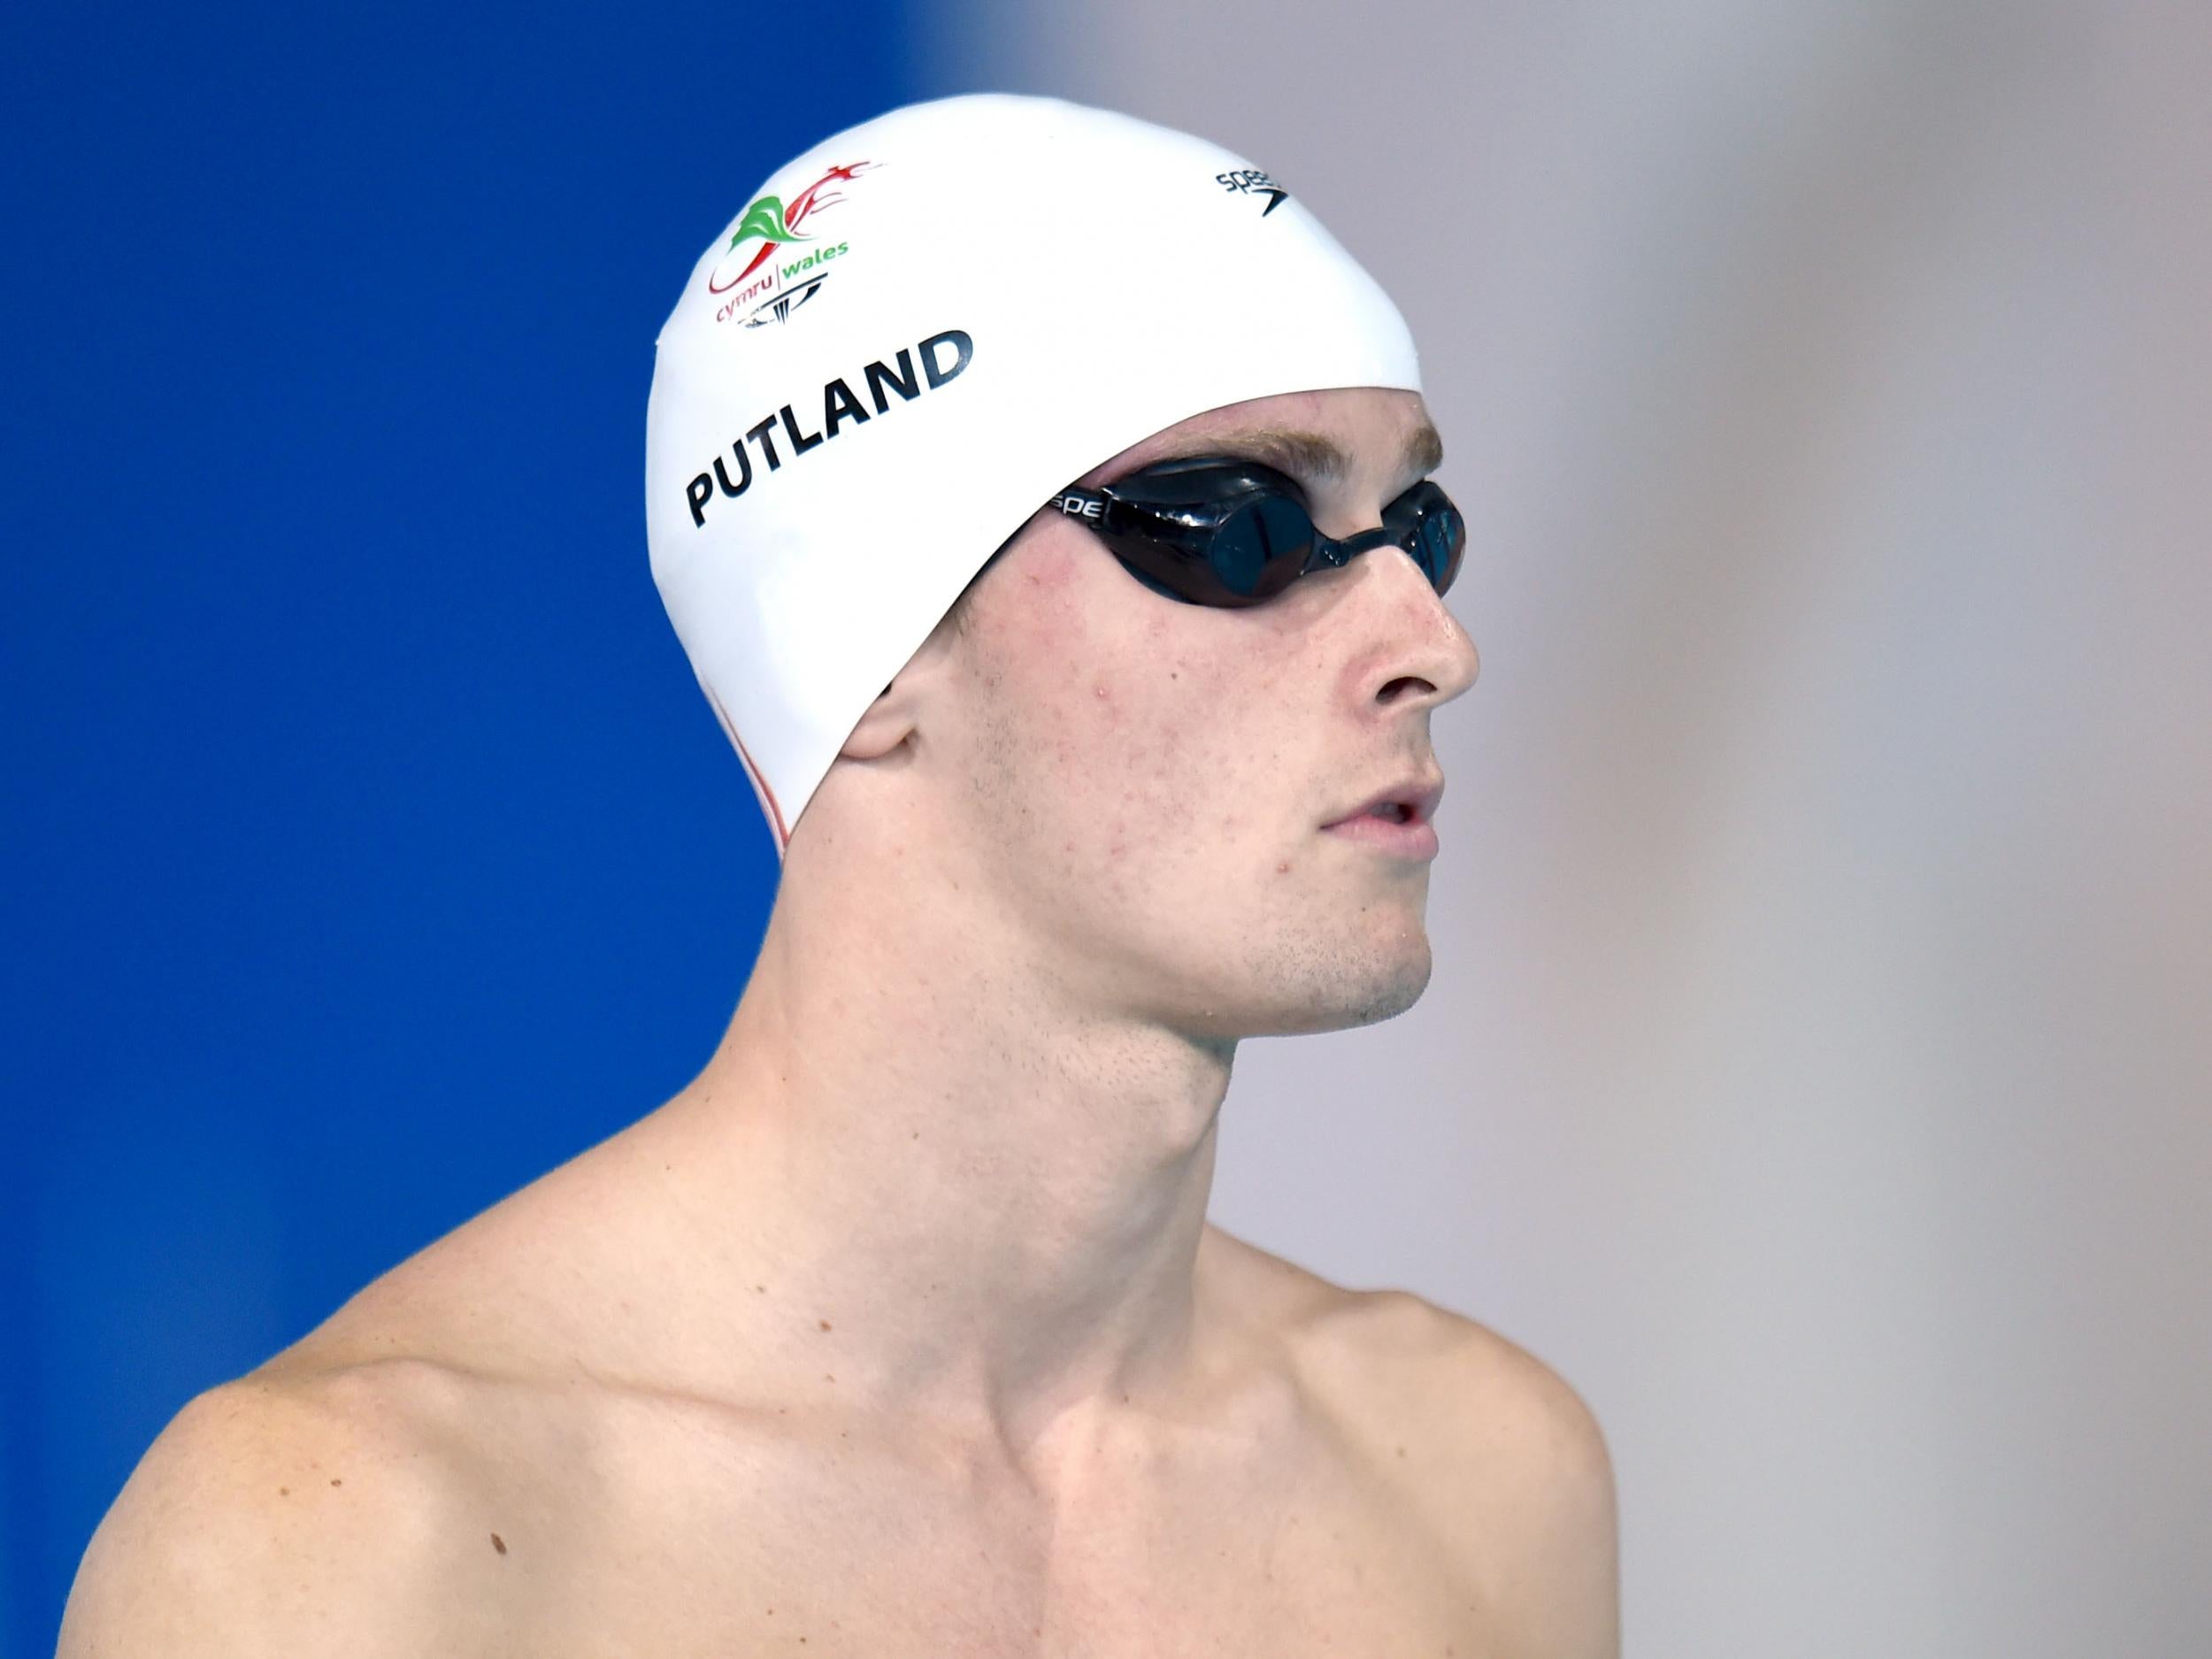 Mr Putland, who is from Dinedor near Hereford and swam in the 2014 games, denies rape